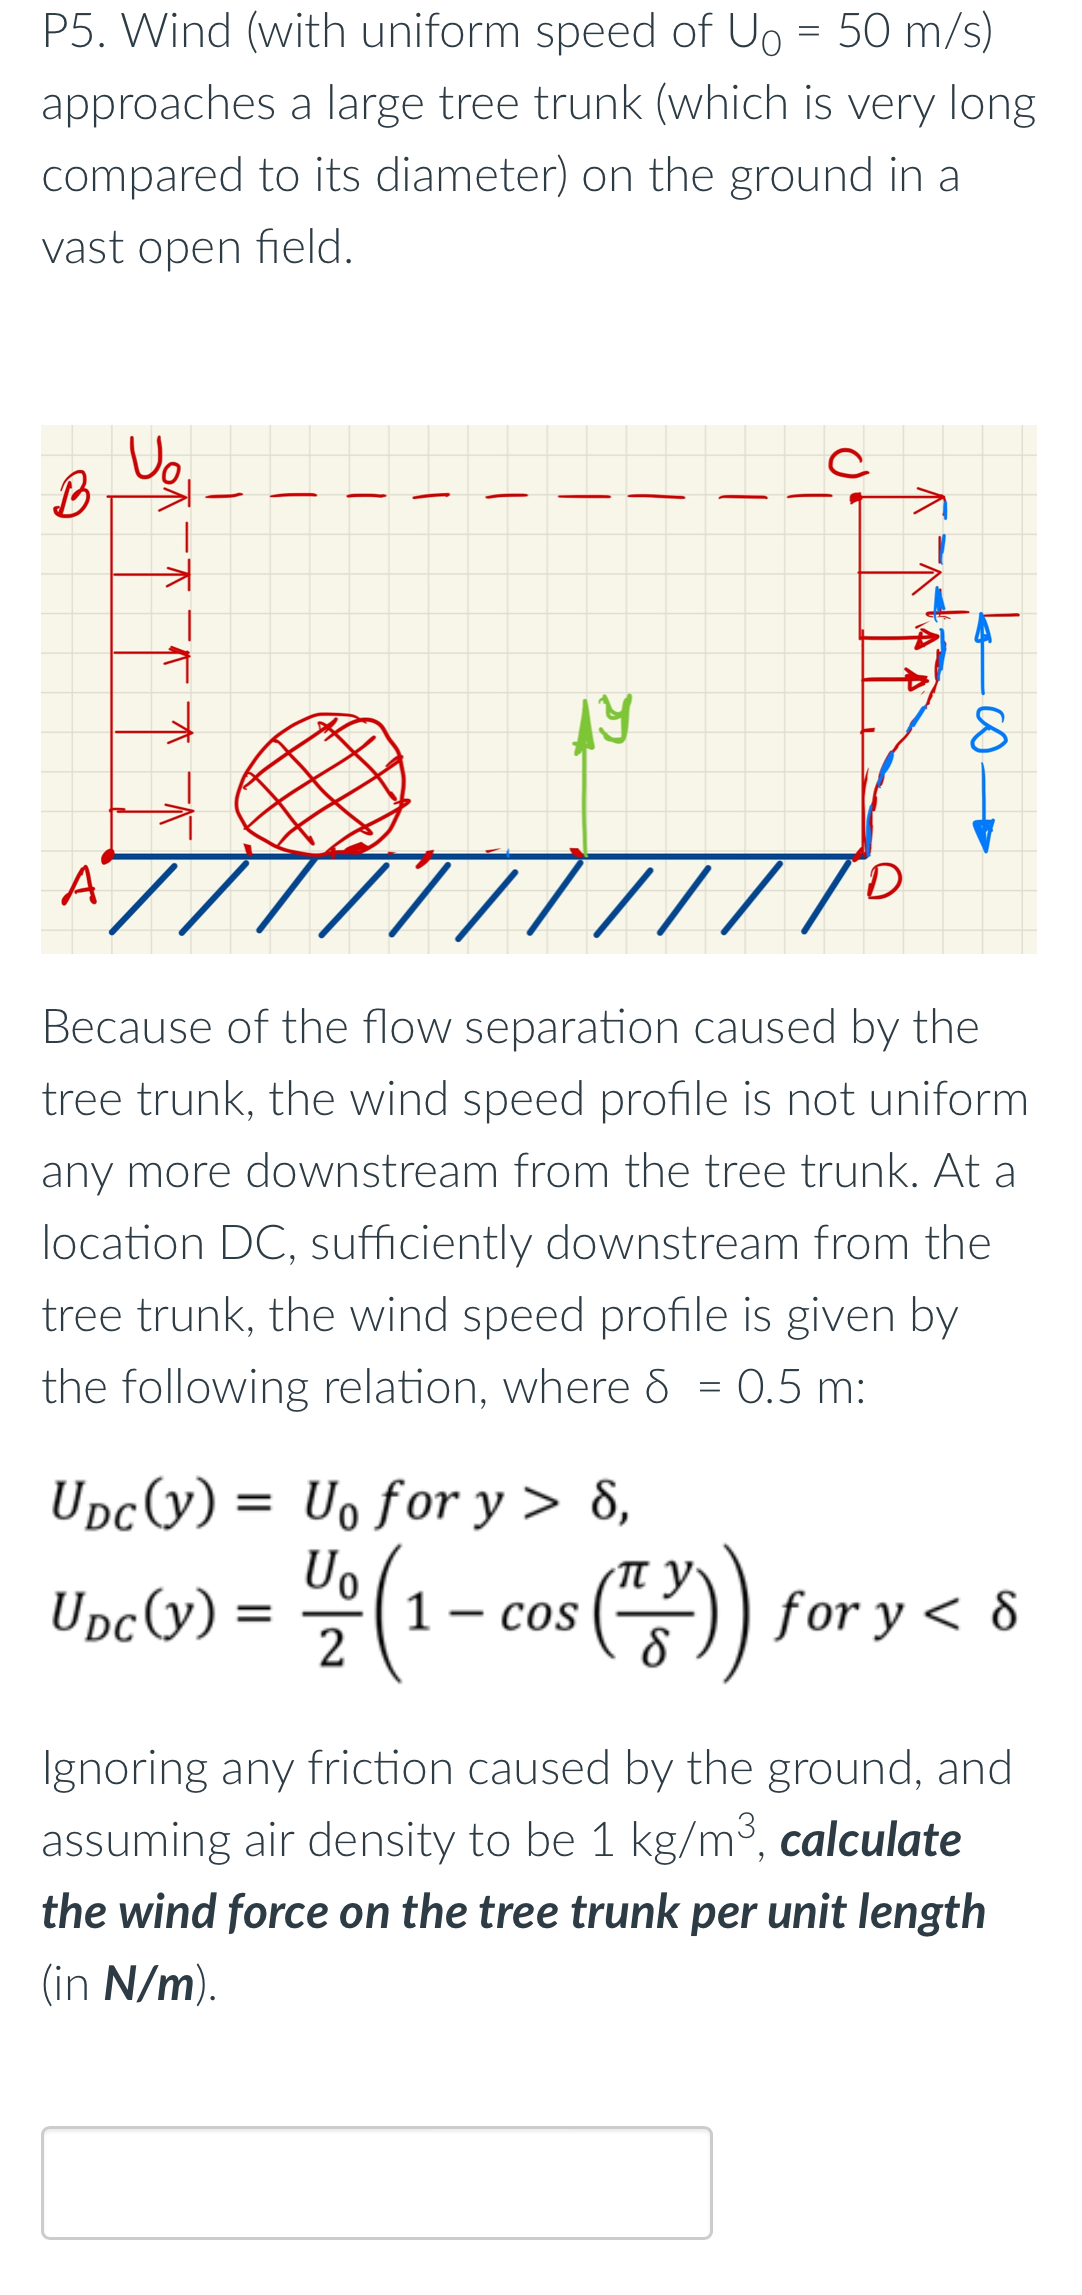 Does wind speed increase at higher altitudes? Considering that the